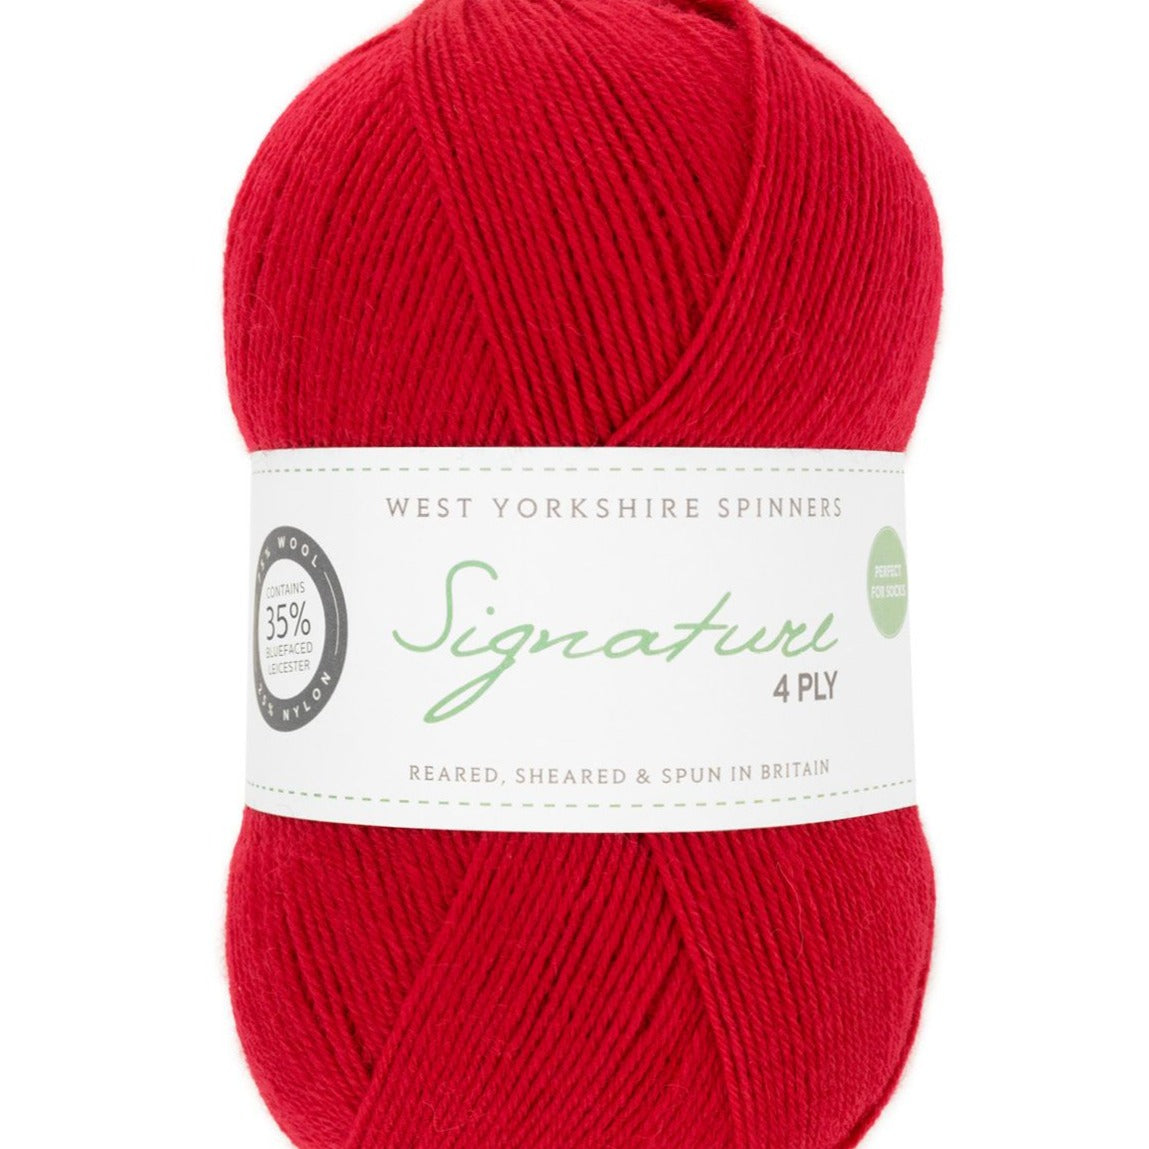 West Yorkshire Spinners Signature 4 ply Rouge